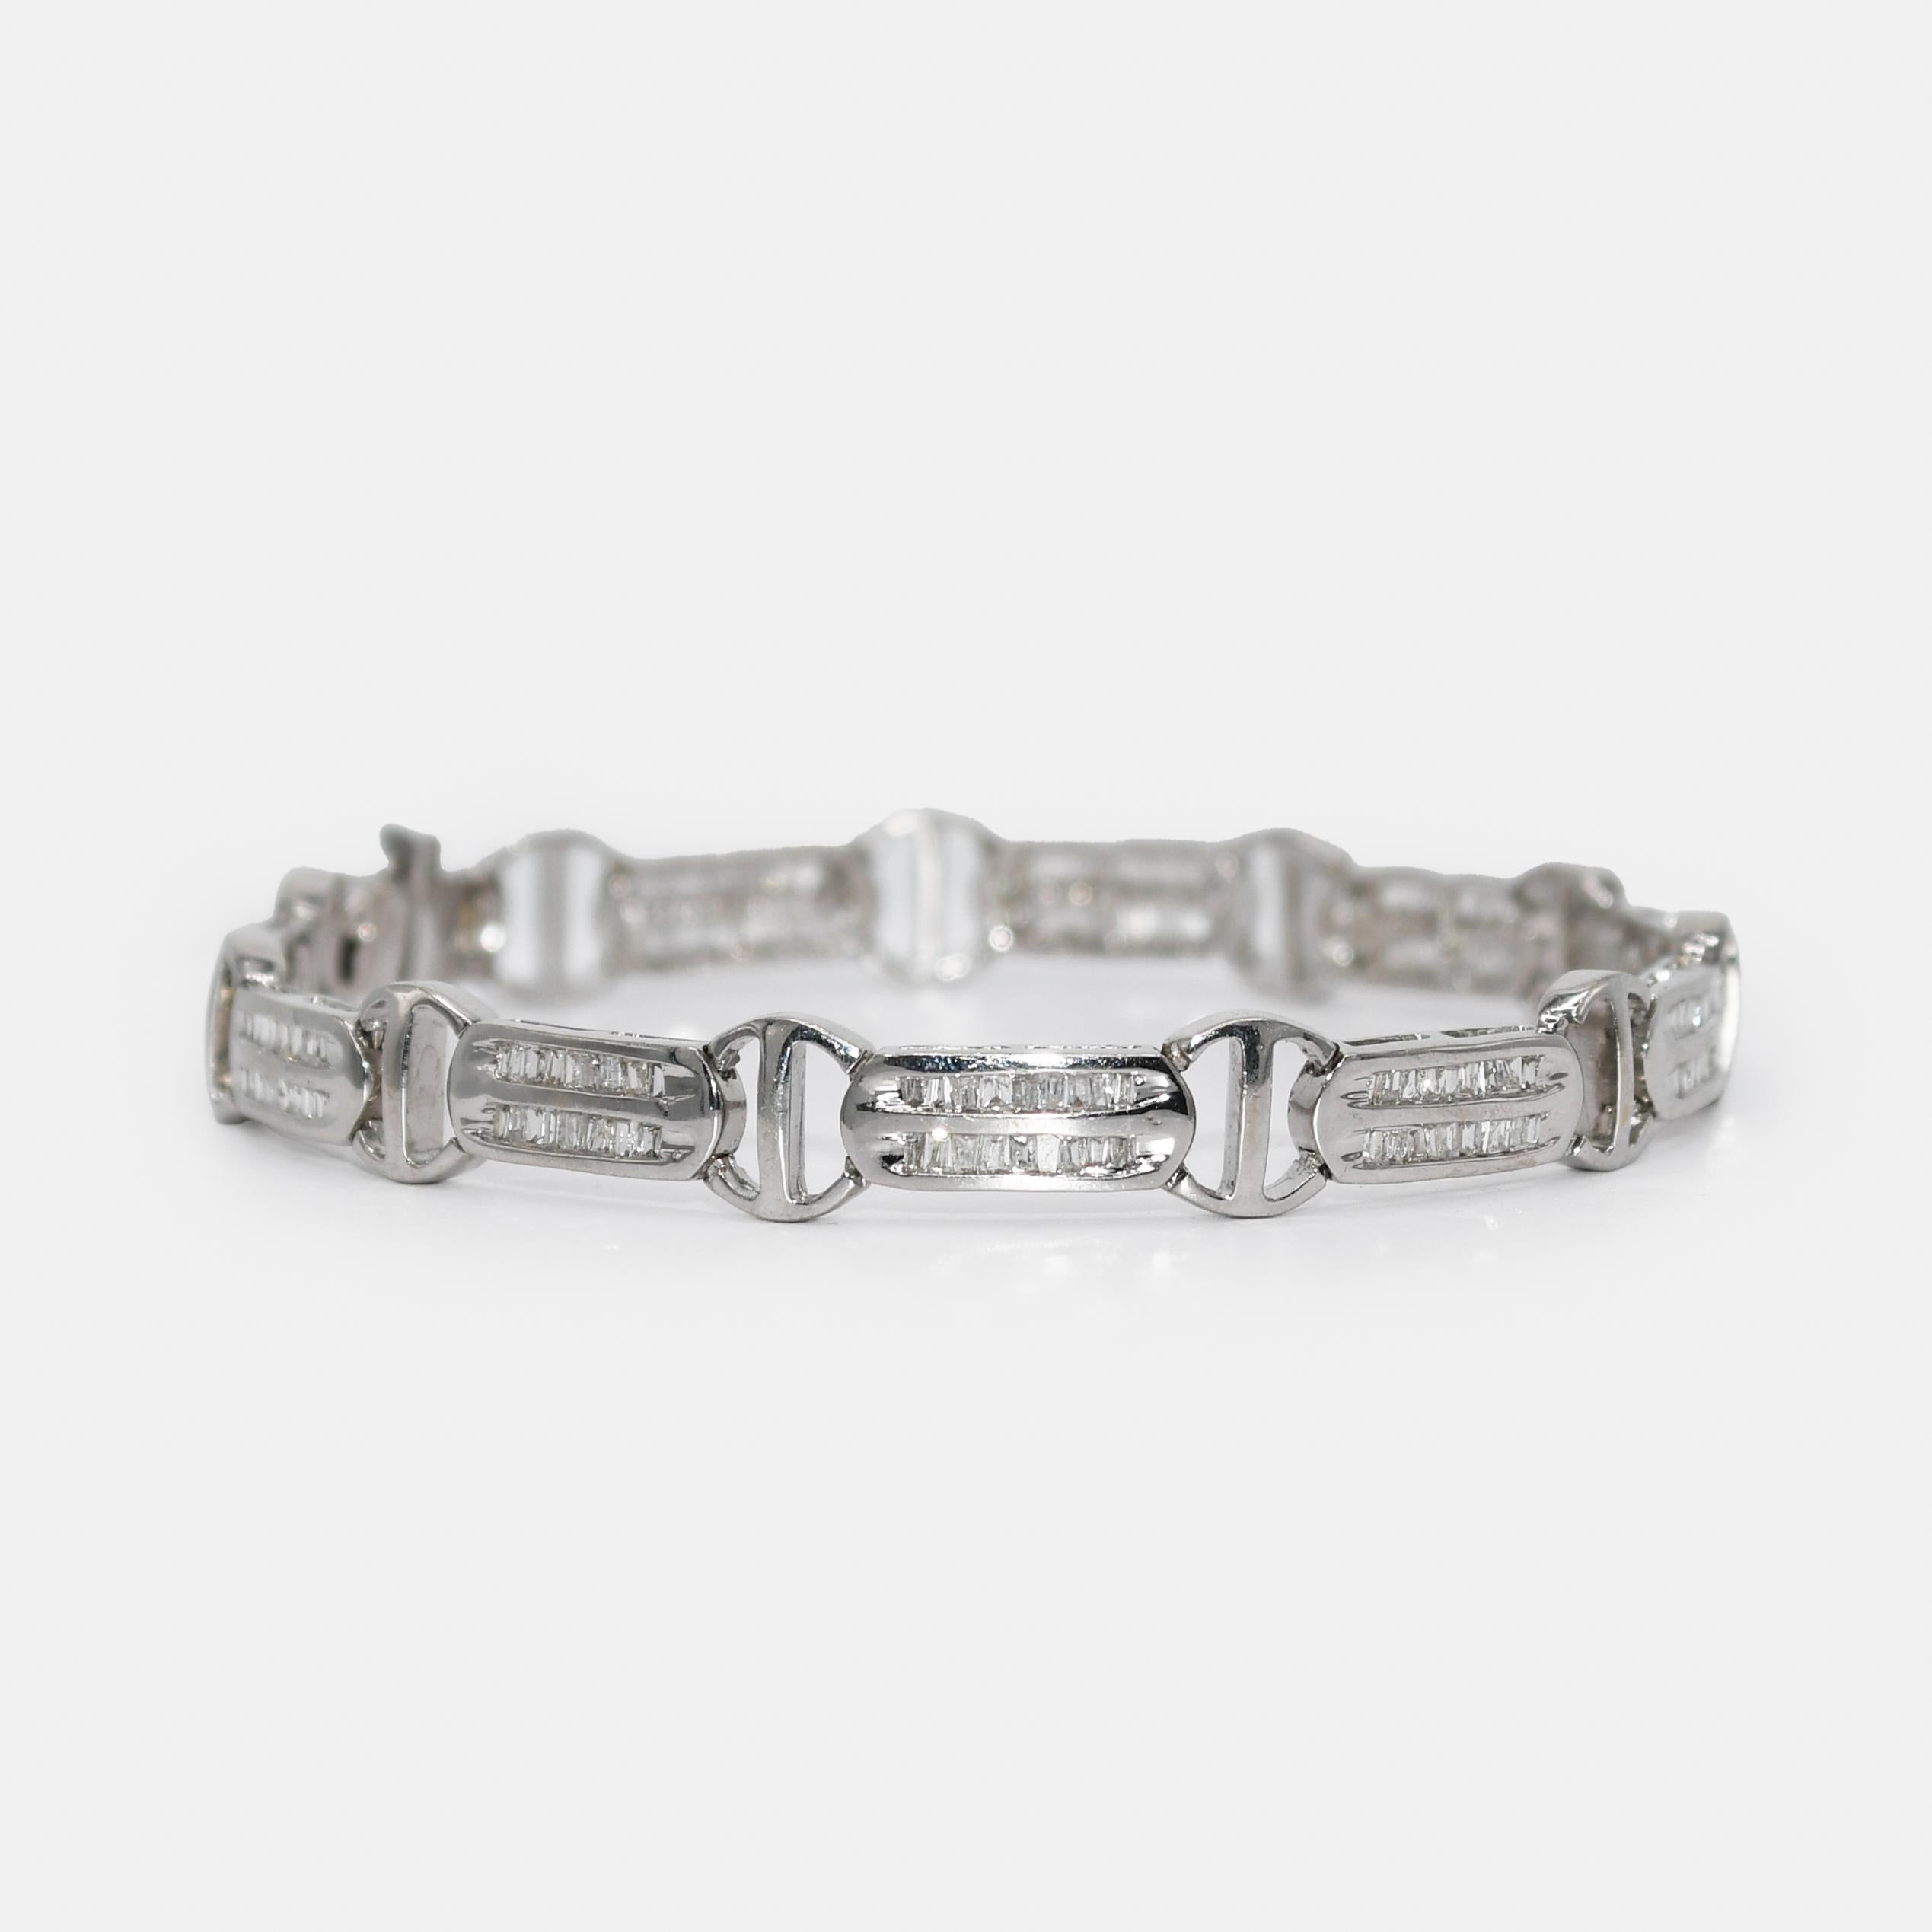 14K White Gold Diamond Bracelet 1.50tdw, 14.3g
Ladies 14k white gold and diamond bracelet.
Stamped 14k and weighs 14.3 grams gross weight.
The diamonds are baguette cuts, 1.50 total carats, i to j color, Si to i1 clarity.
The bracelet measures 7 1/4